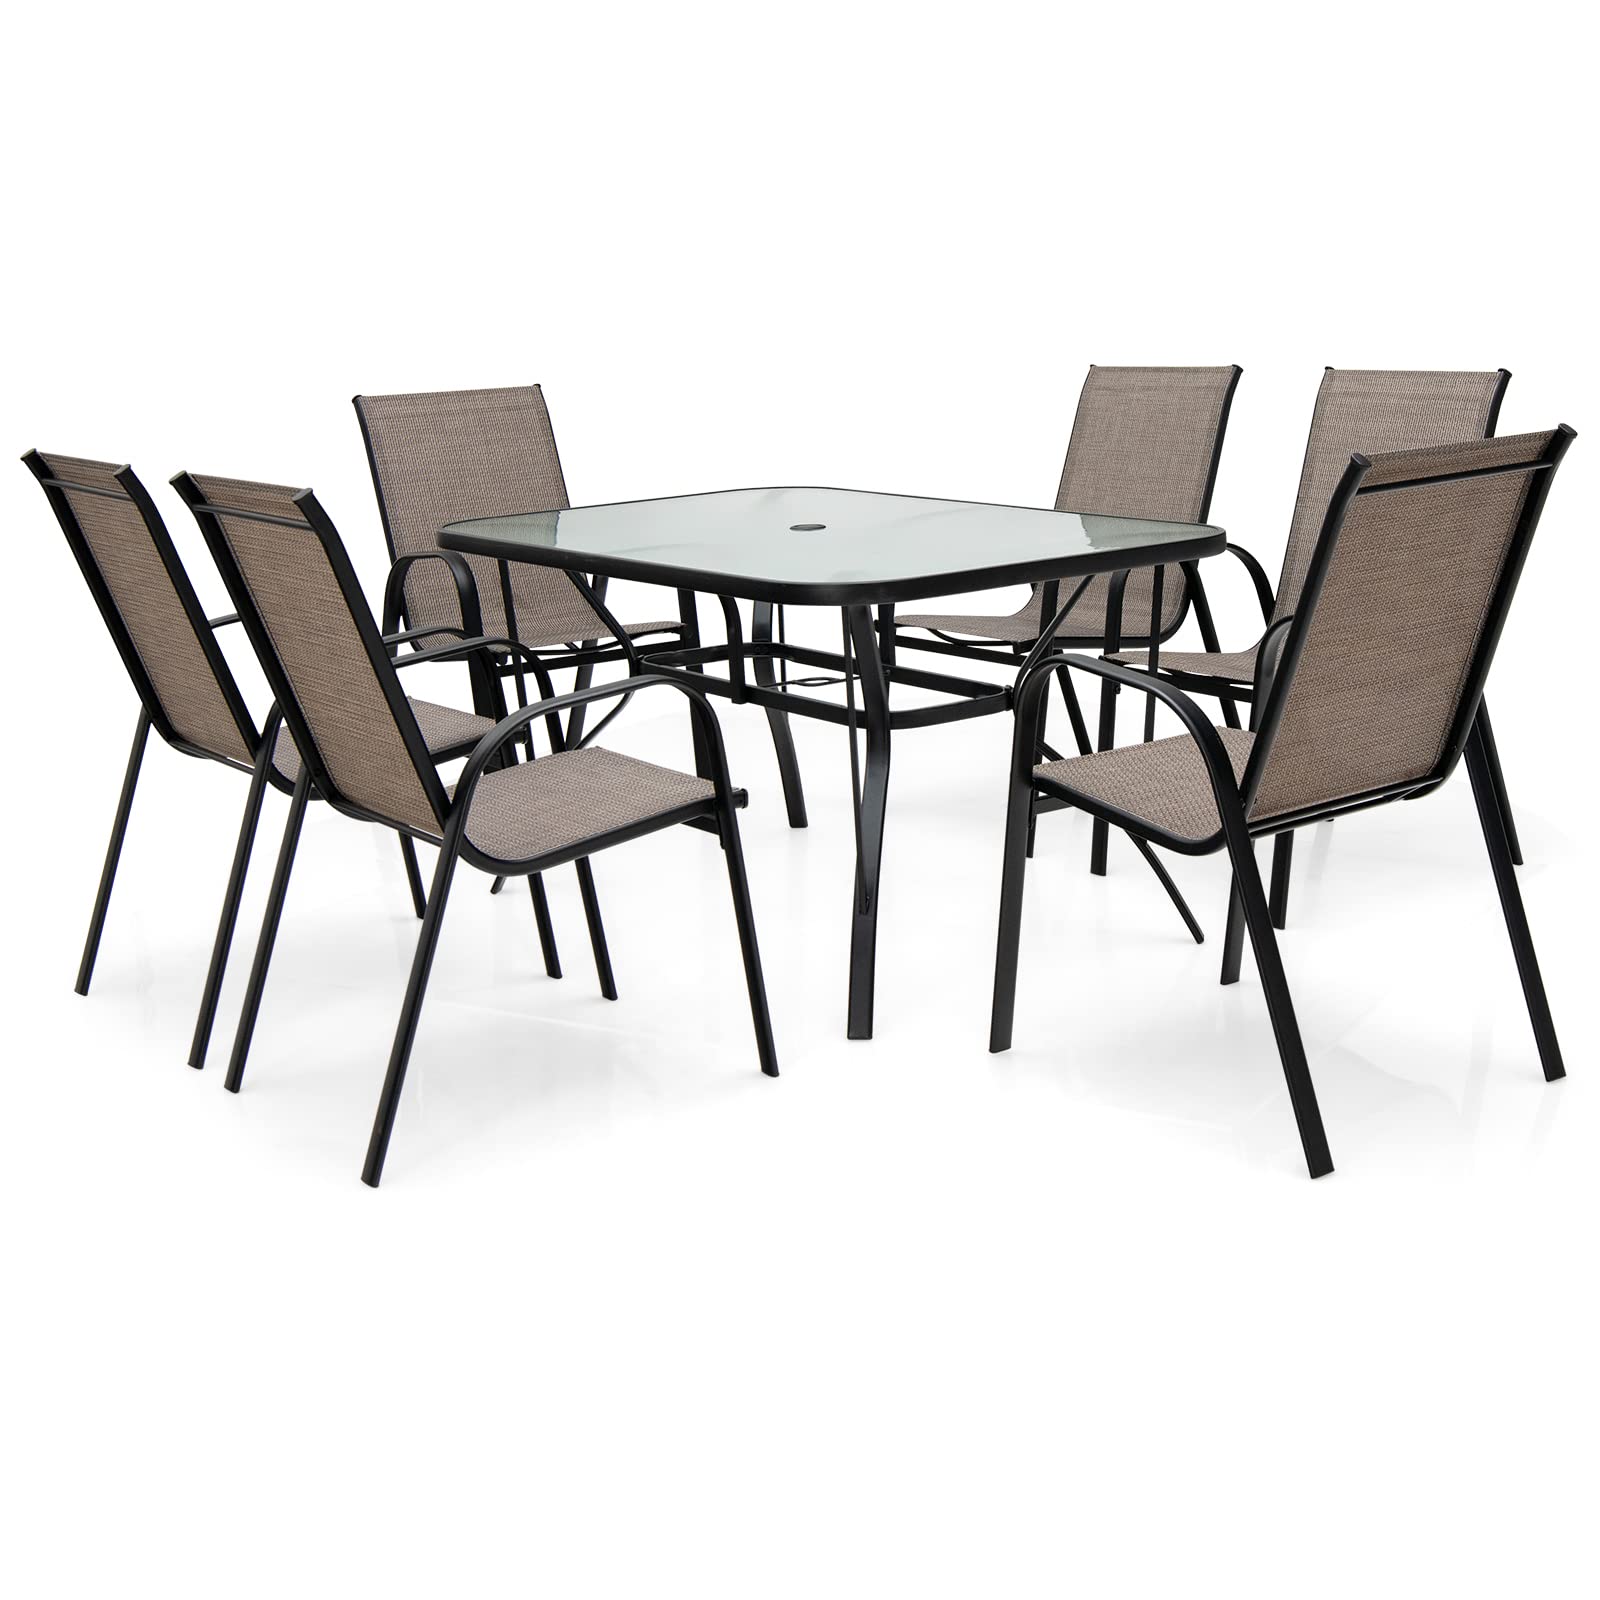 Giantex 7 Piece Patio Dining Set, Outdoor Dining Table Set with 6 Stackable Chairs